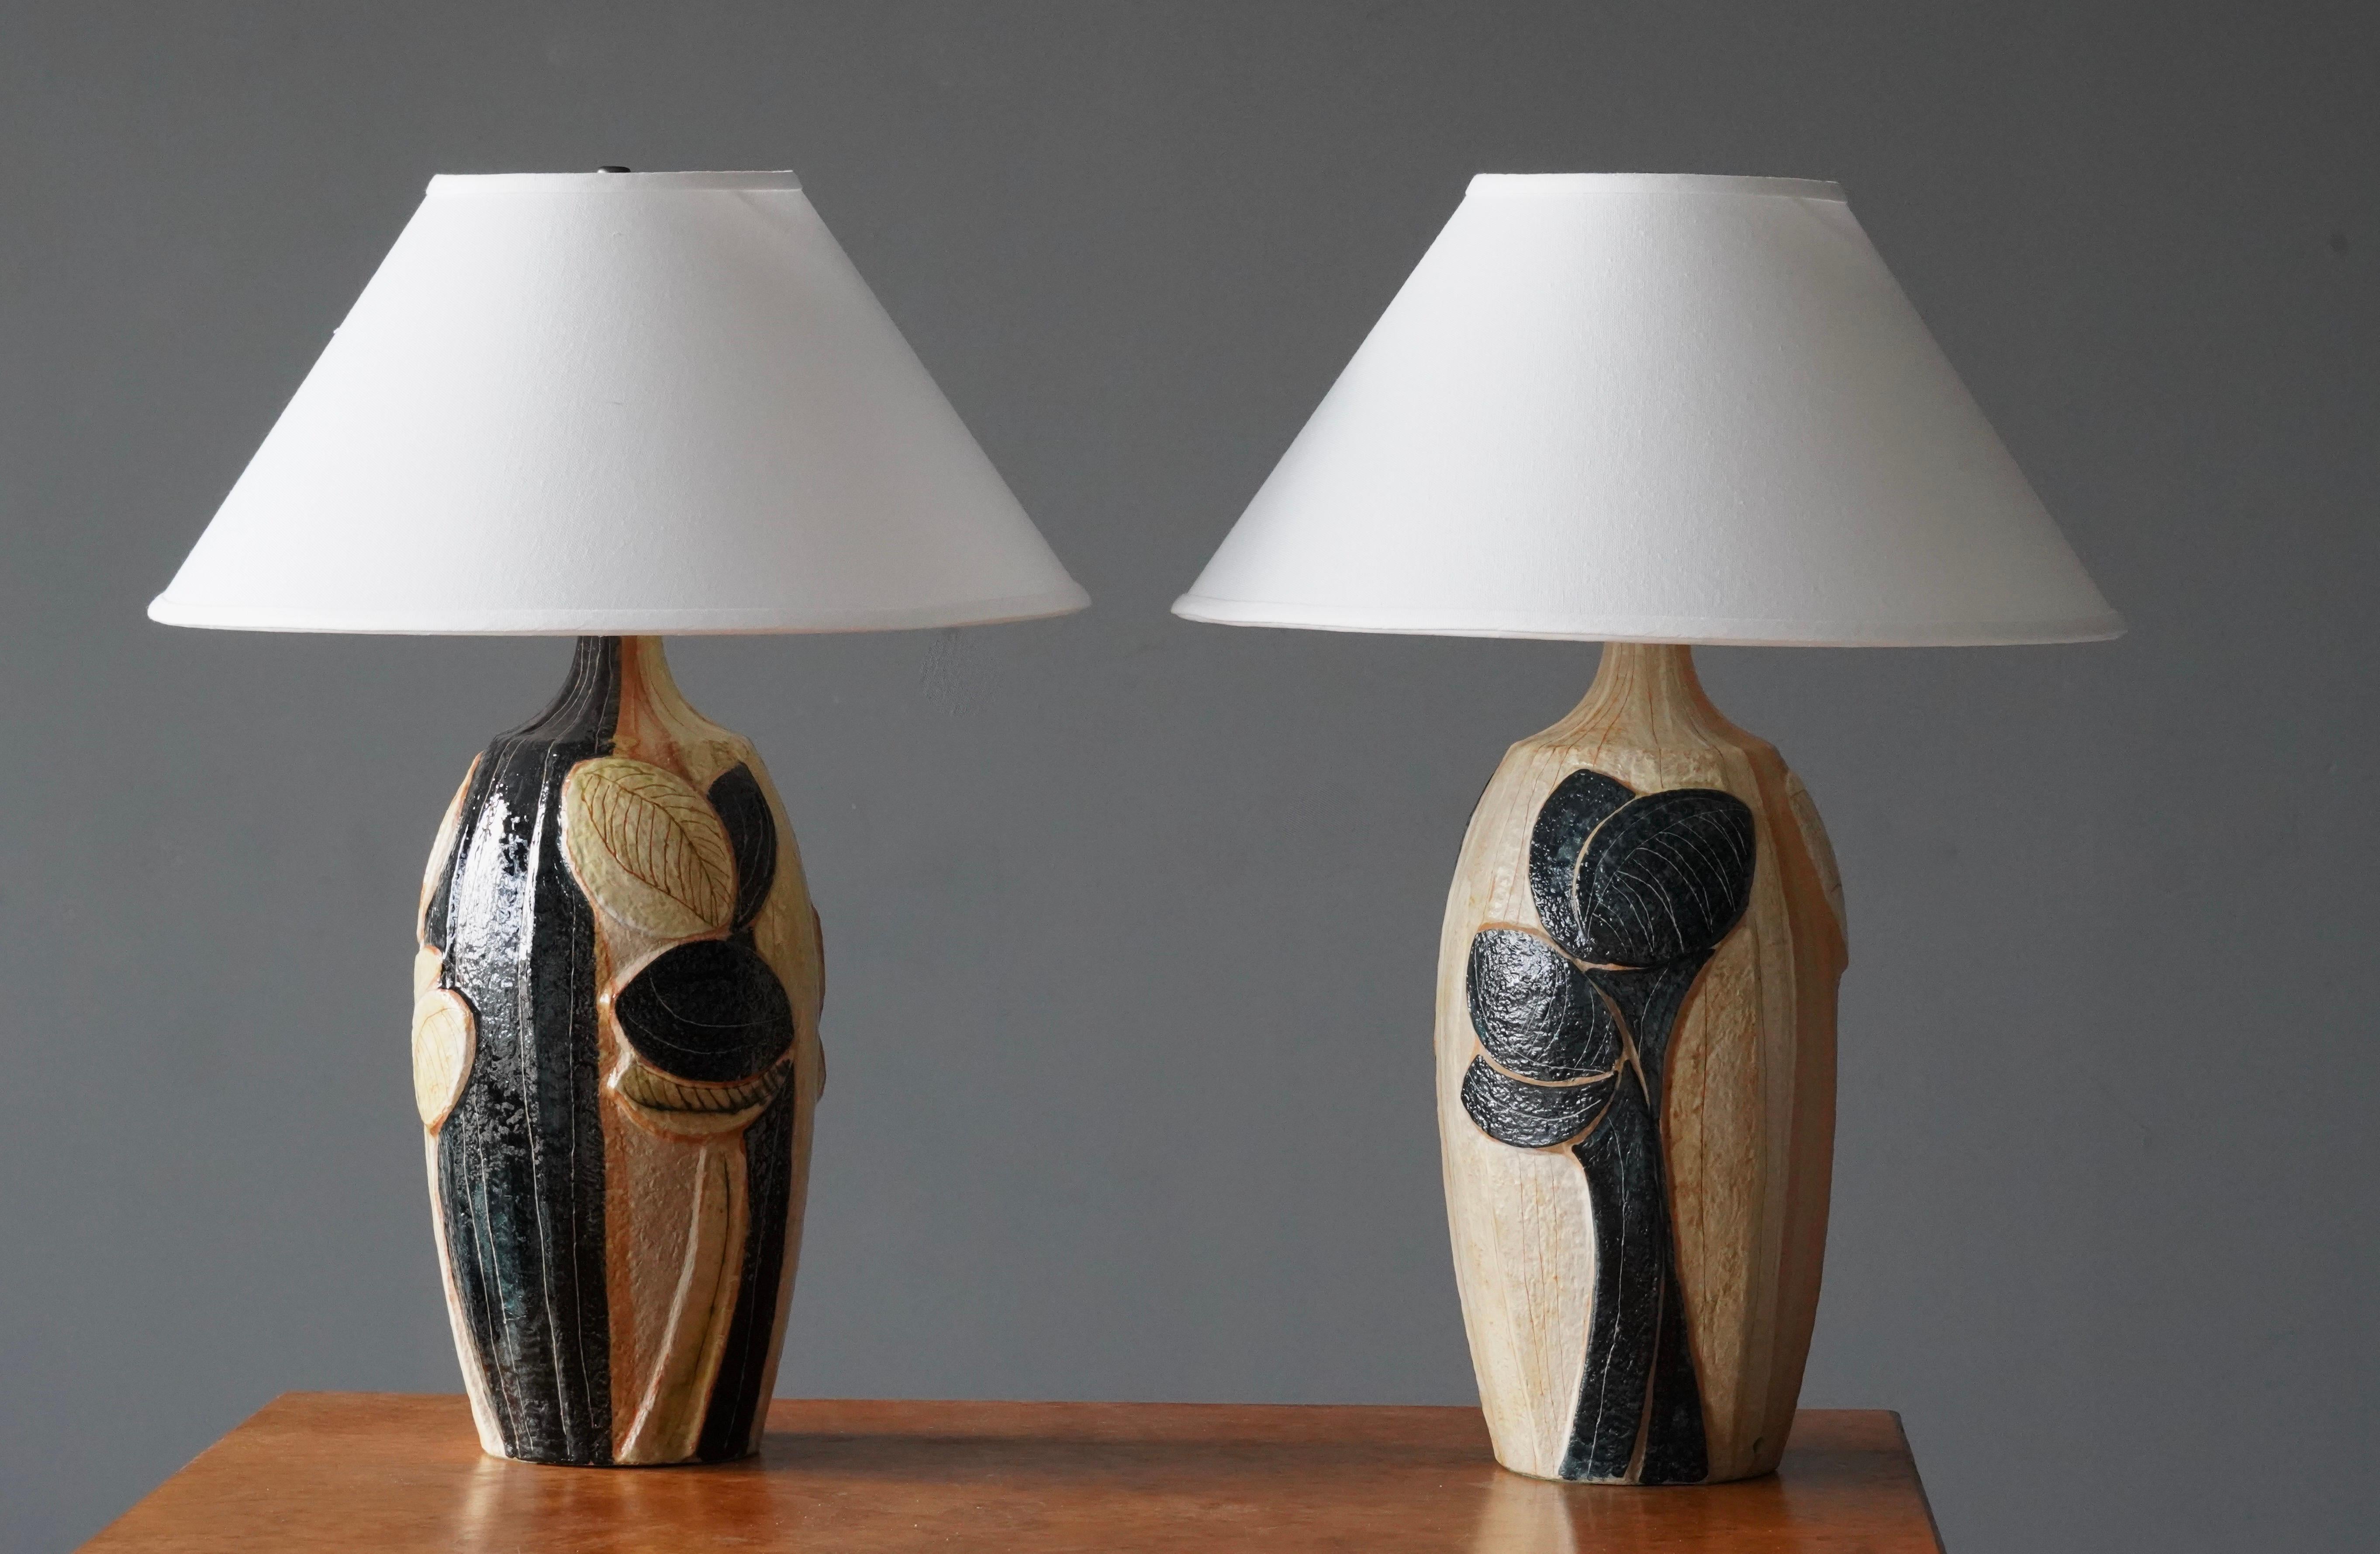 A pair of large table lamp produced by Søholm Keramik, located on the island of Bornholm in Denmark. Design by Noomi Backhausen, signed. Lampshade not included.

Dimensions listed are without lampshade. Sold without lampshades.
Dimensions with